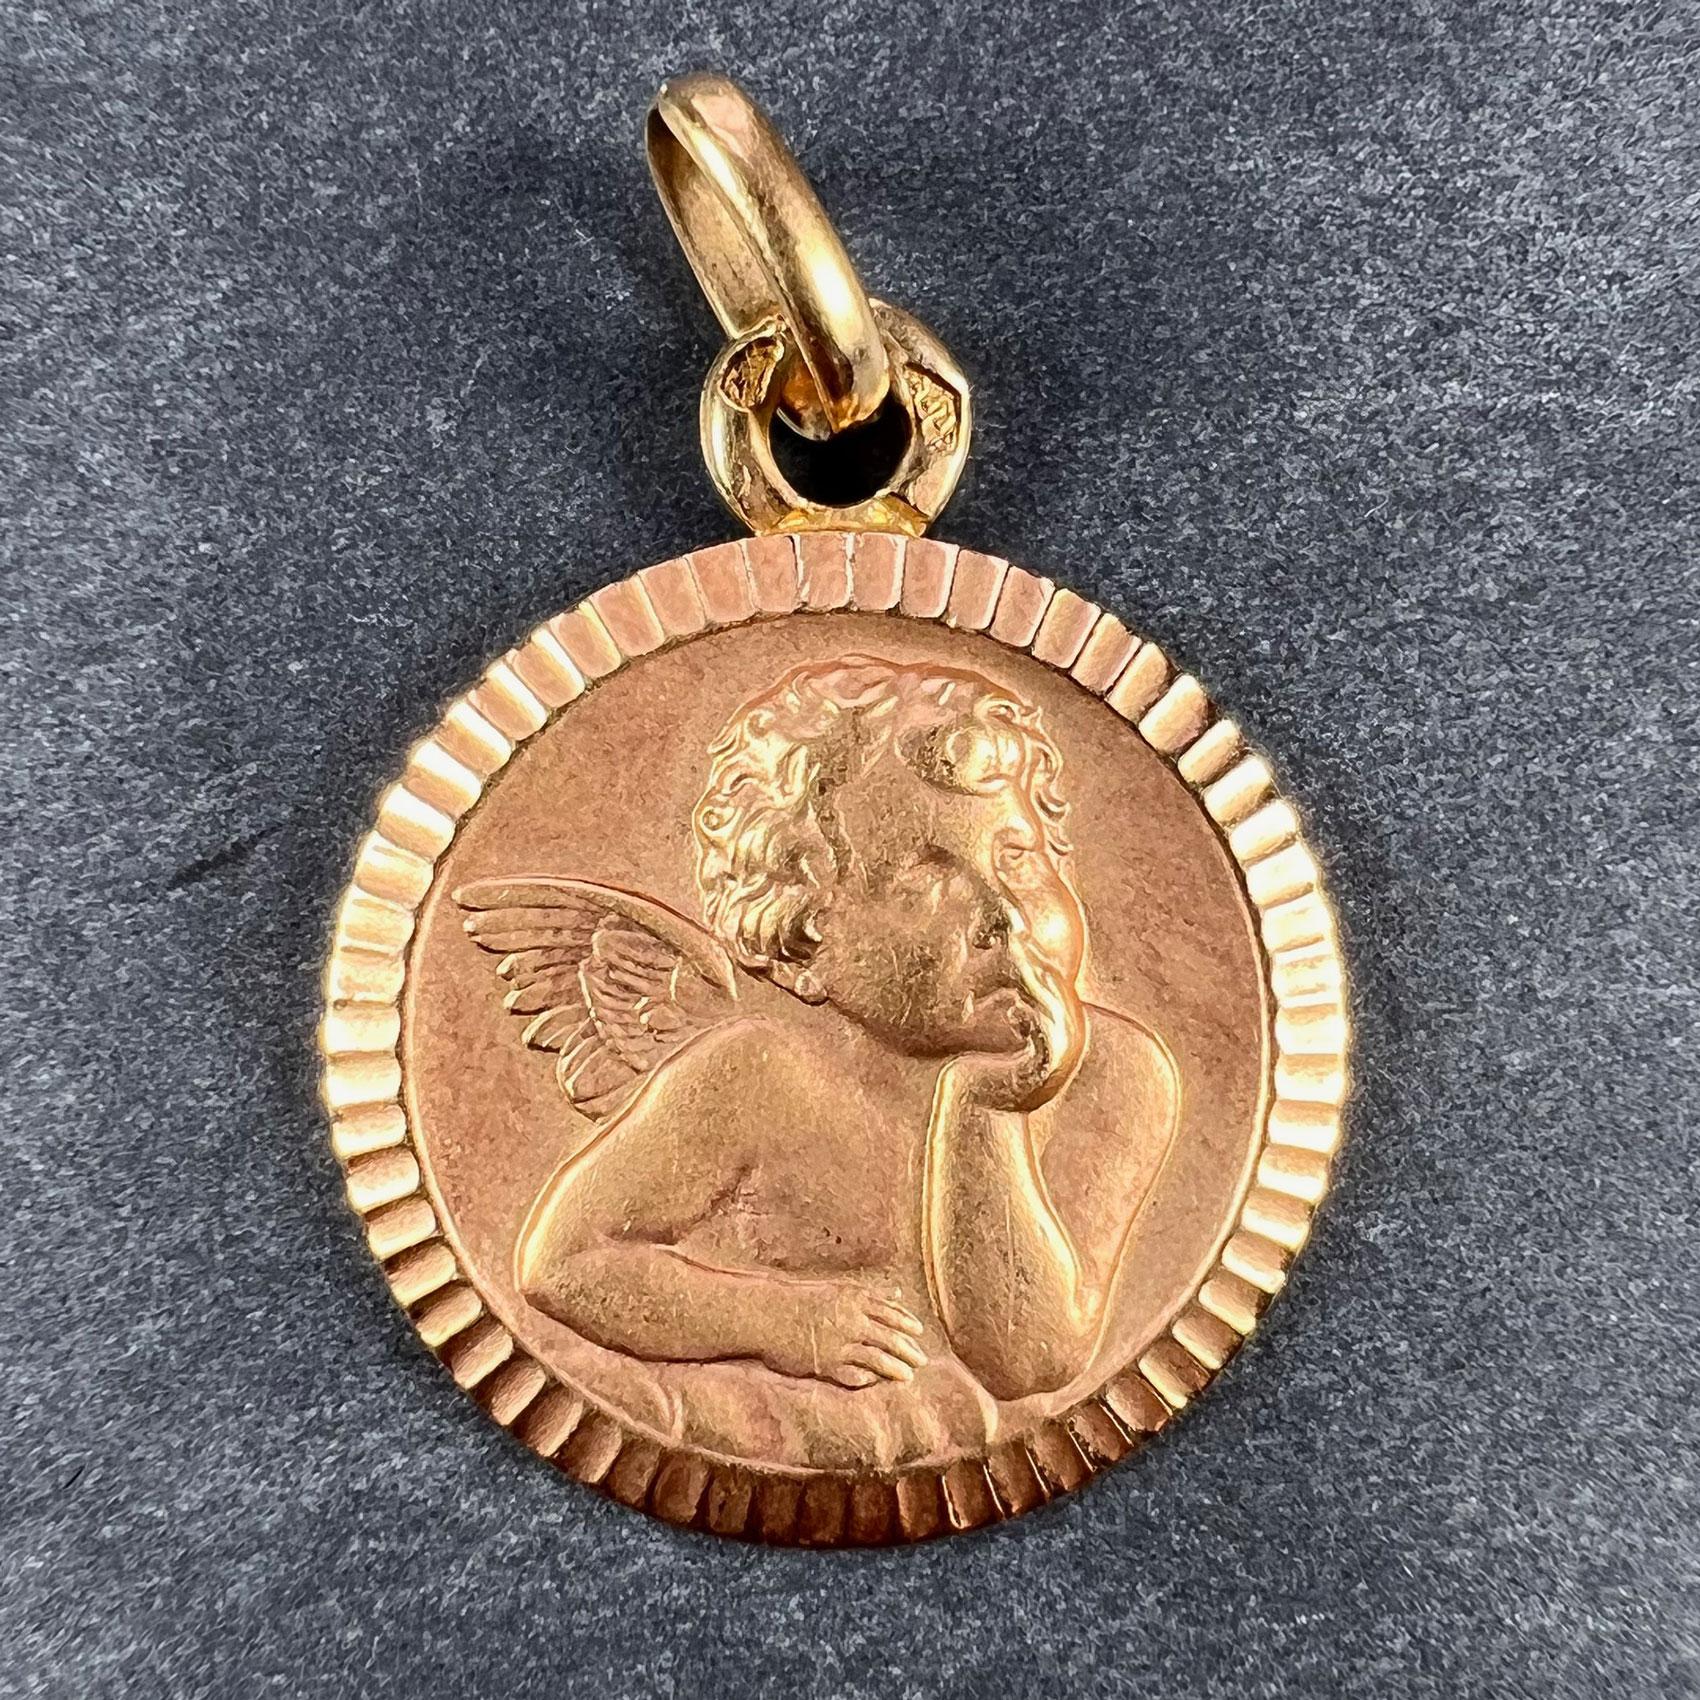 A French 18 karat (18K) rose gold charm pendant designed as a medal depicting Rafael’s cherub within a ridged frame. Stamped with the eagle mark for 18 karat gold and French manufacture with an unknown maker's mark.  

Dimensions: 2.2 x 1.8 x 0.15